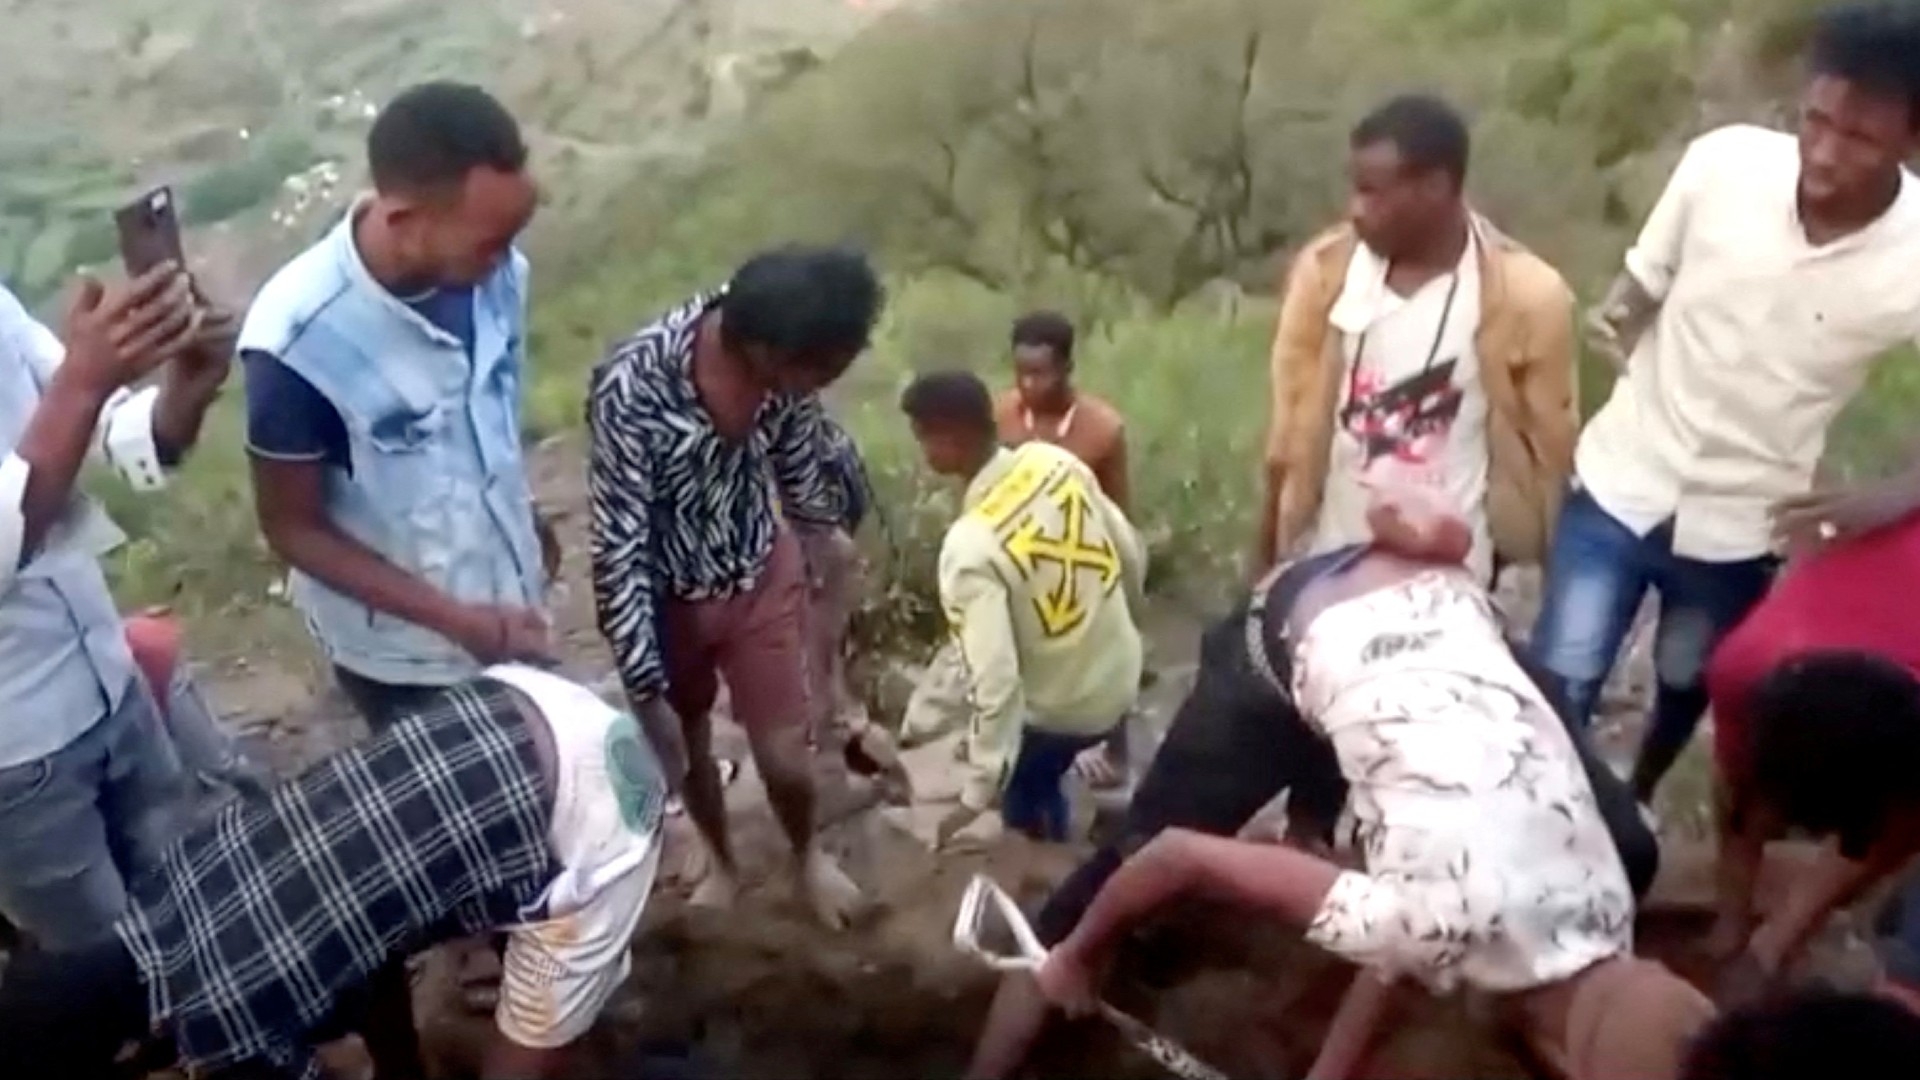 Migrants dig a grave near the trail from Al Thabit into Saudi Arabia, on the Yemen side